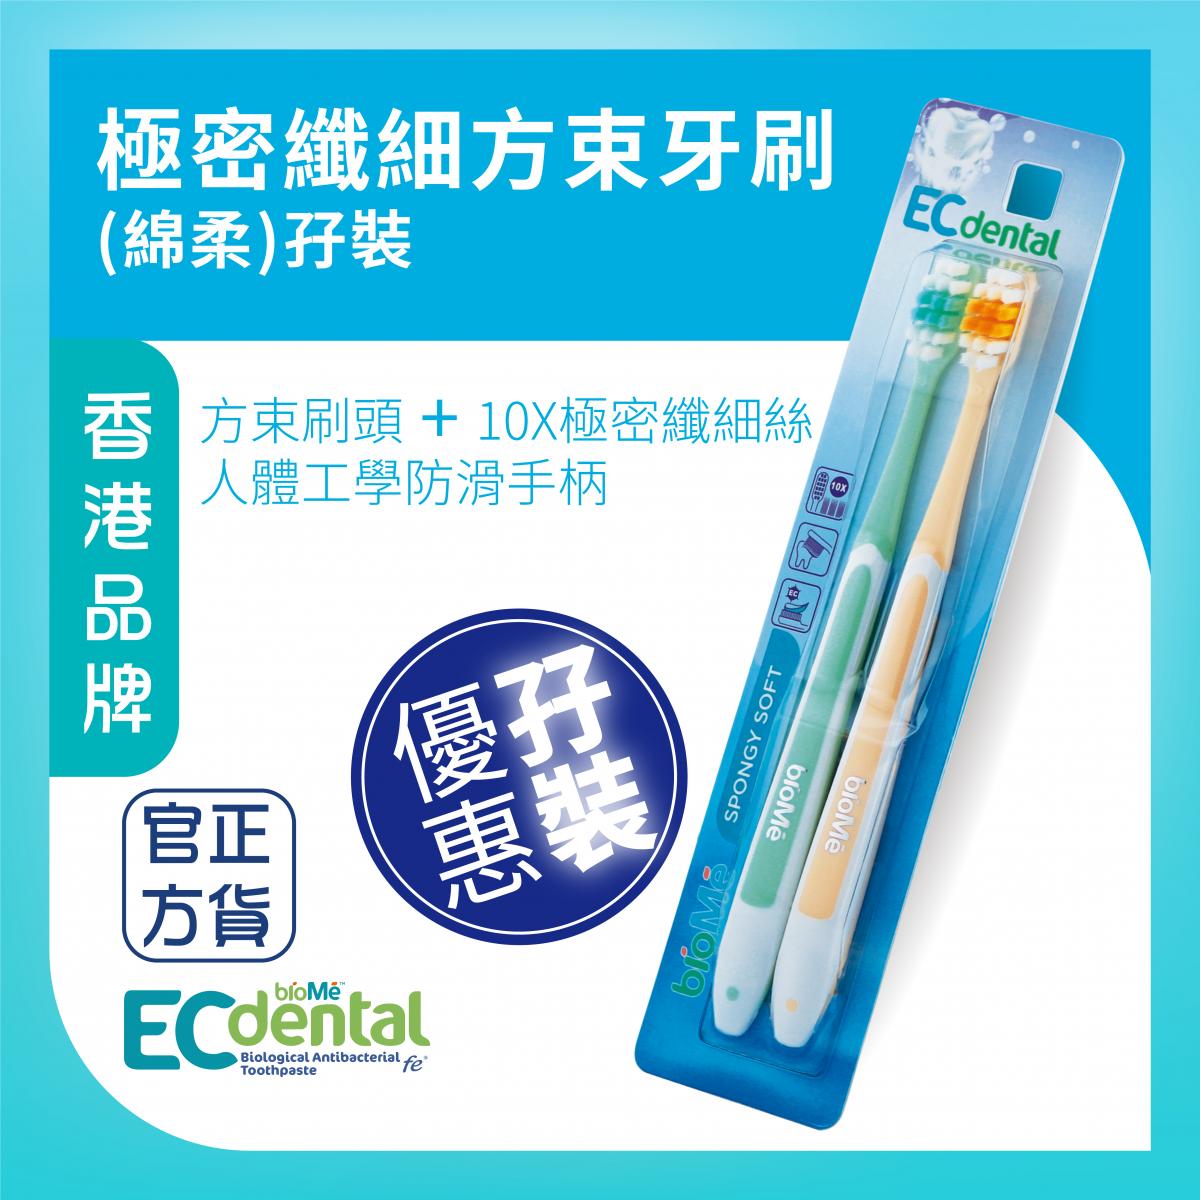 ECdental Extra-dense Filament Grid Toothbrush (Spongy Soft) Twin Pack (Color random delivery)